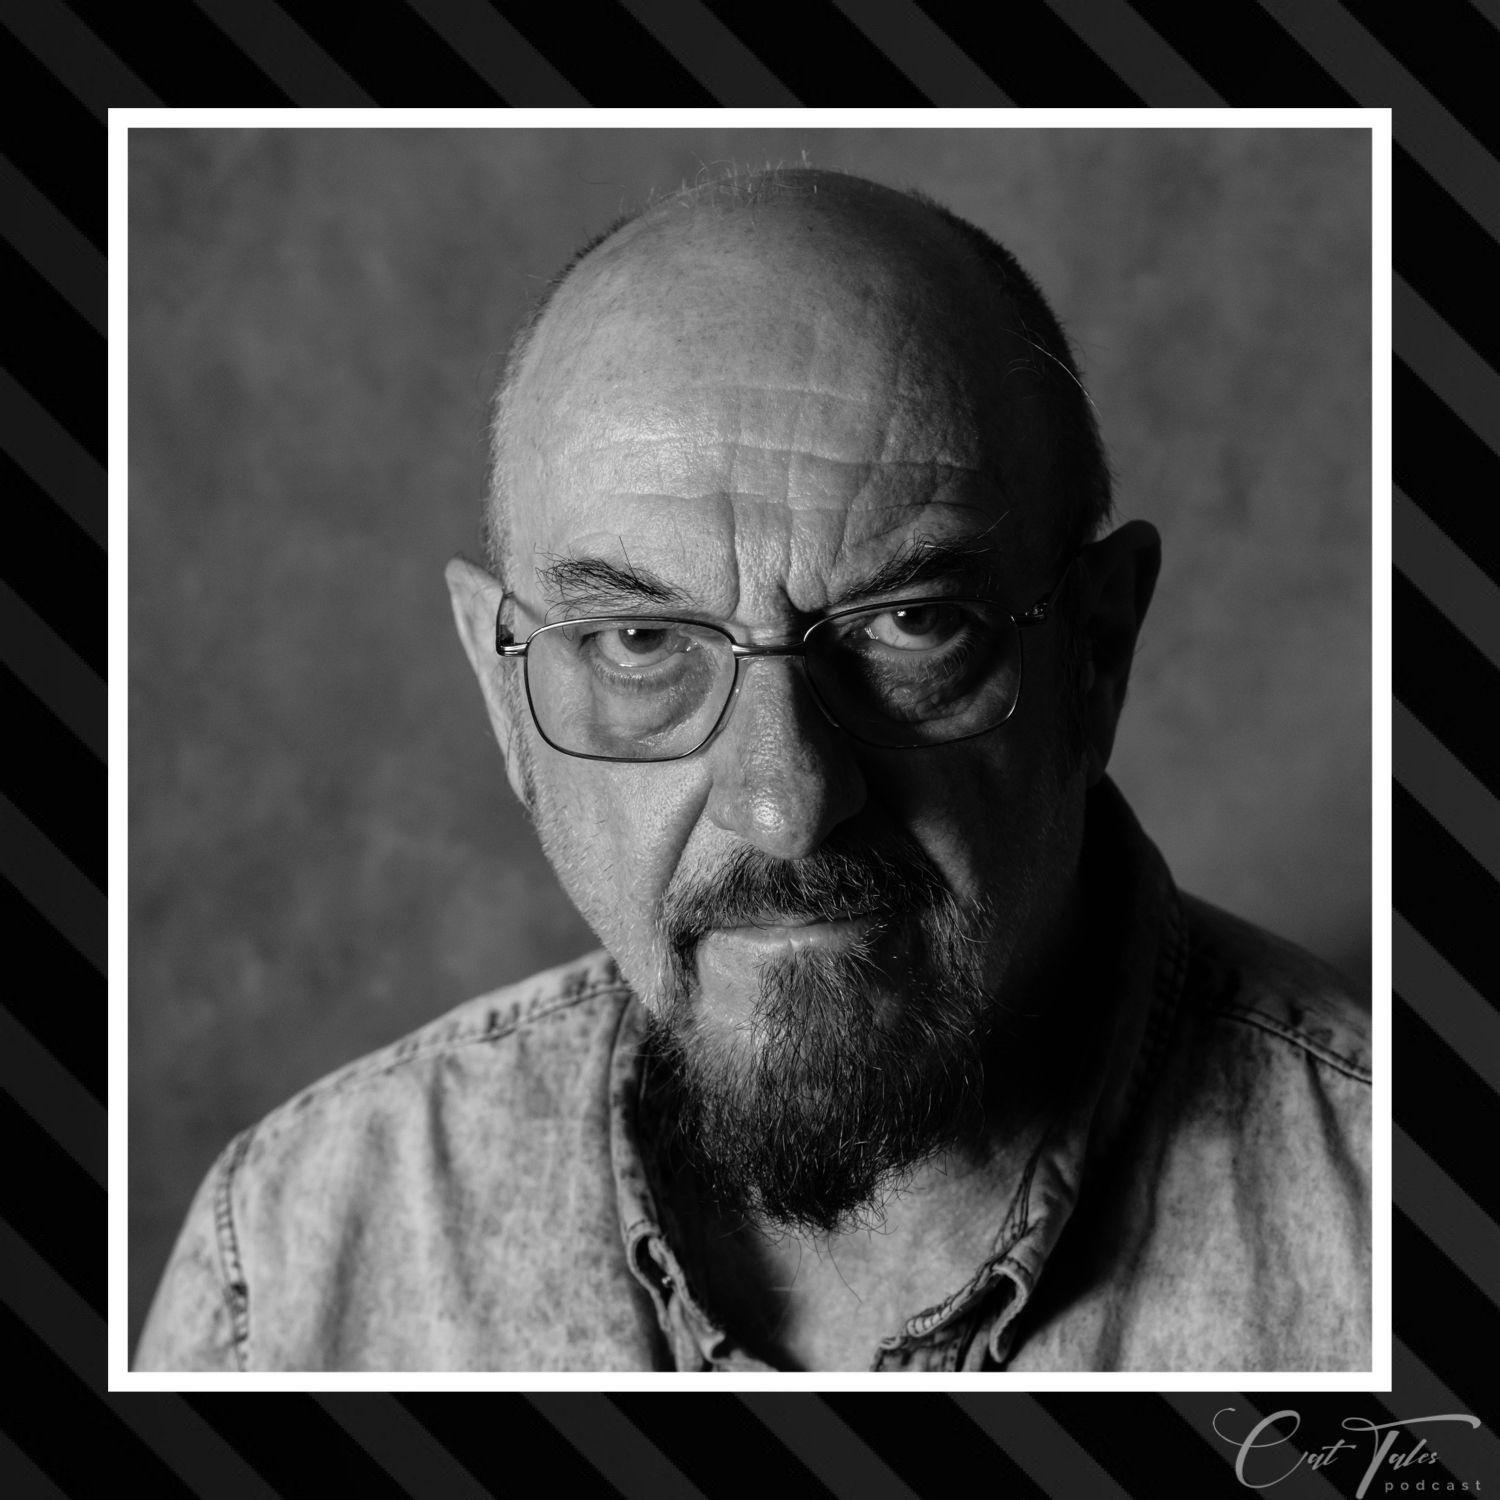 83: The one with Jethro Tull's Ian Anderson Image